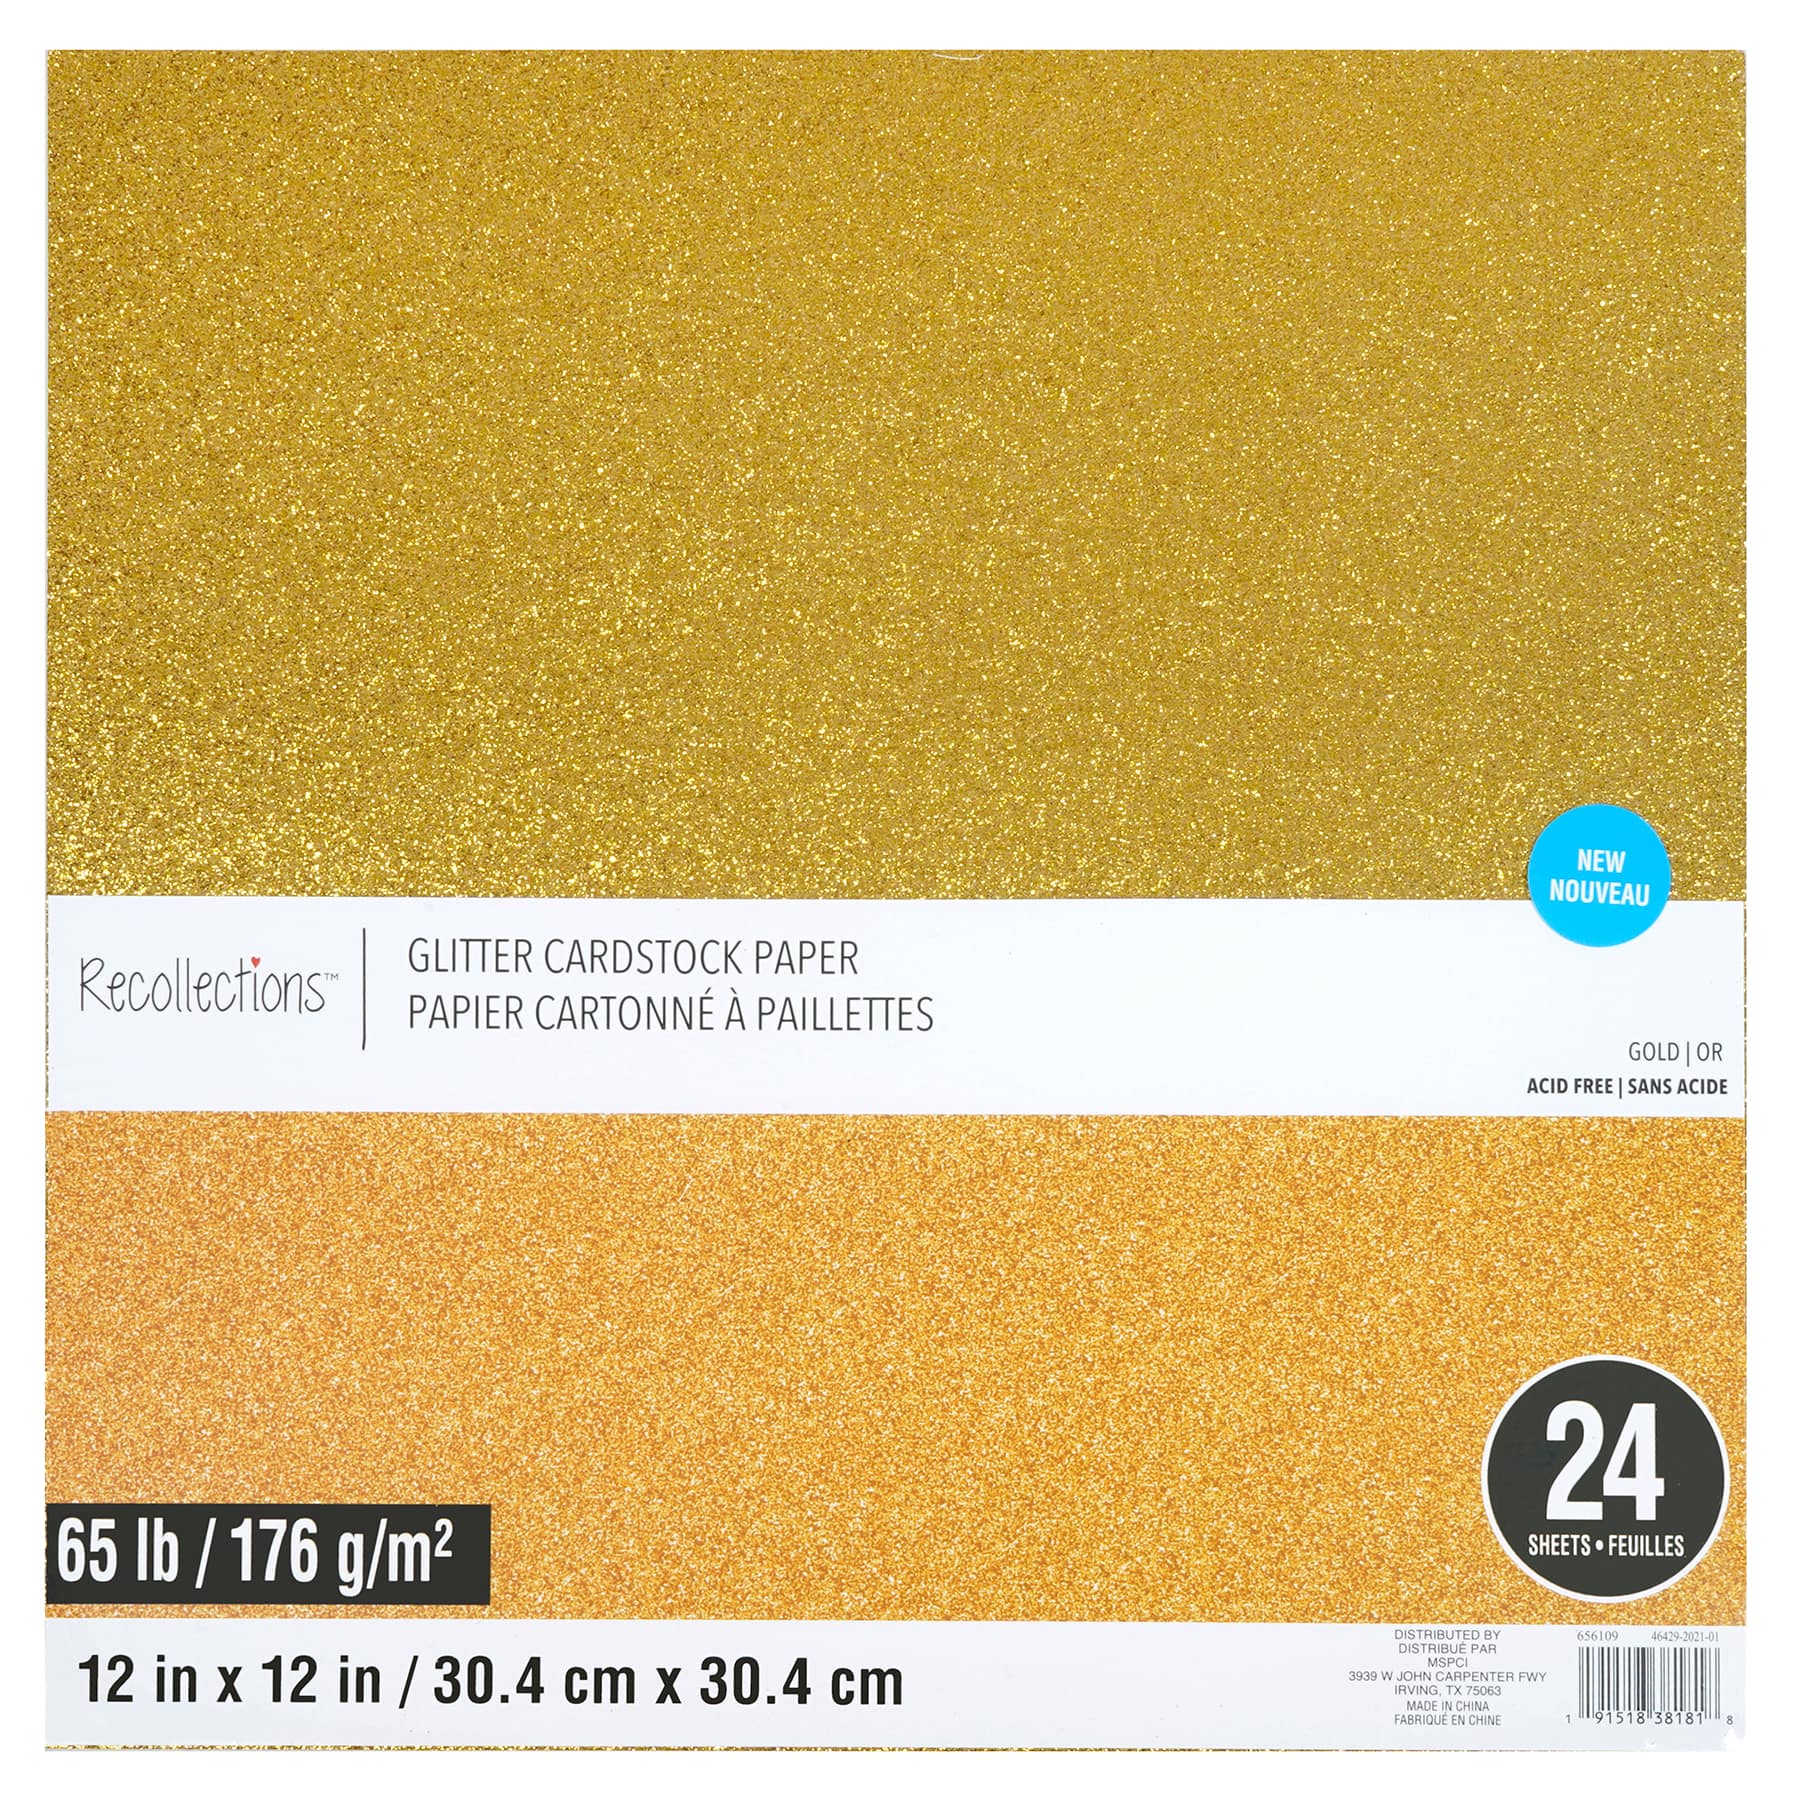 Michaels Bulk 6 Packs: 24 Ct. (144 Total) Glitter 12 inch x 12 inch Cardstock Paper by Recollections, Size: 12 x 12, Gold